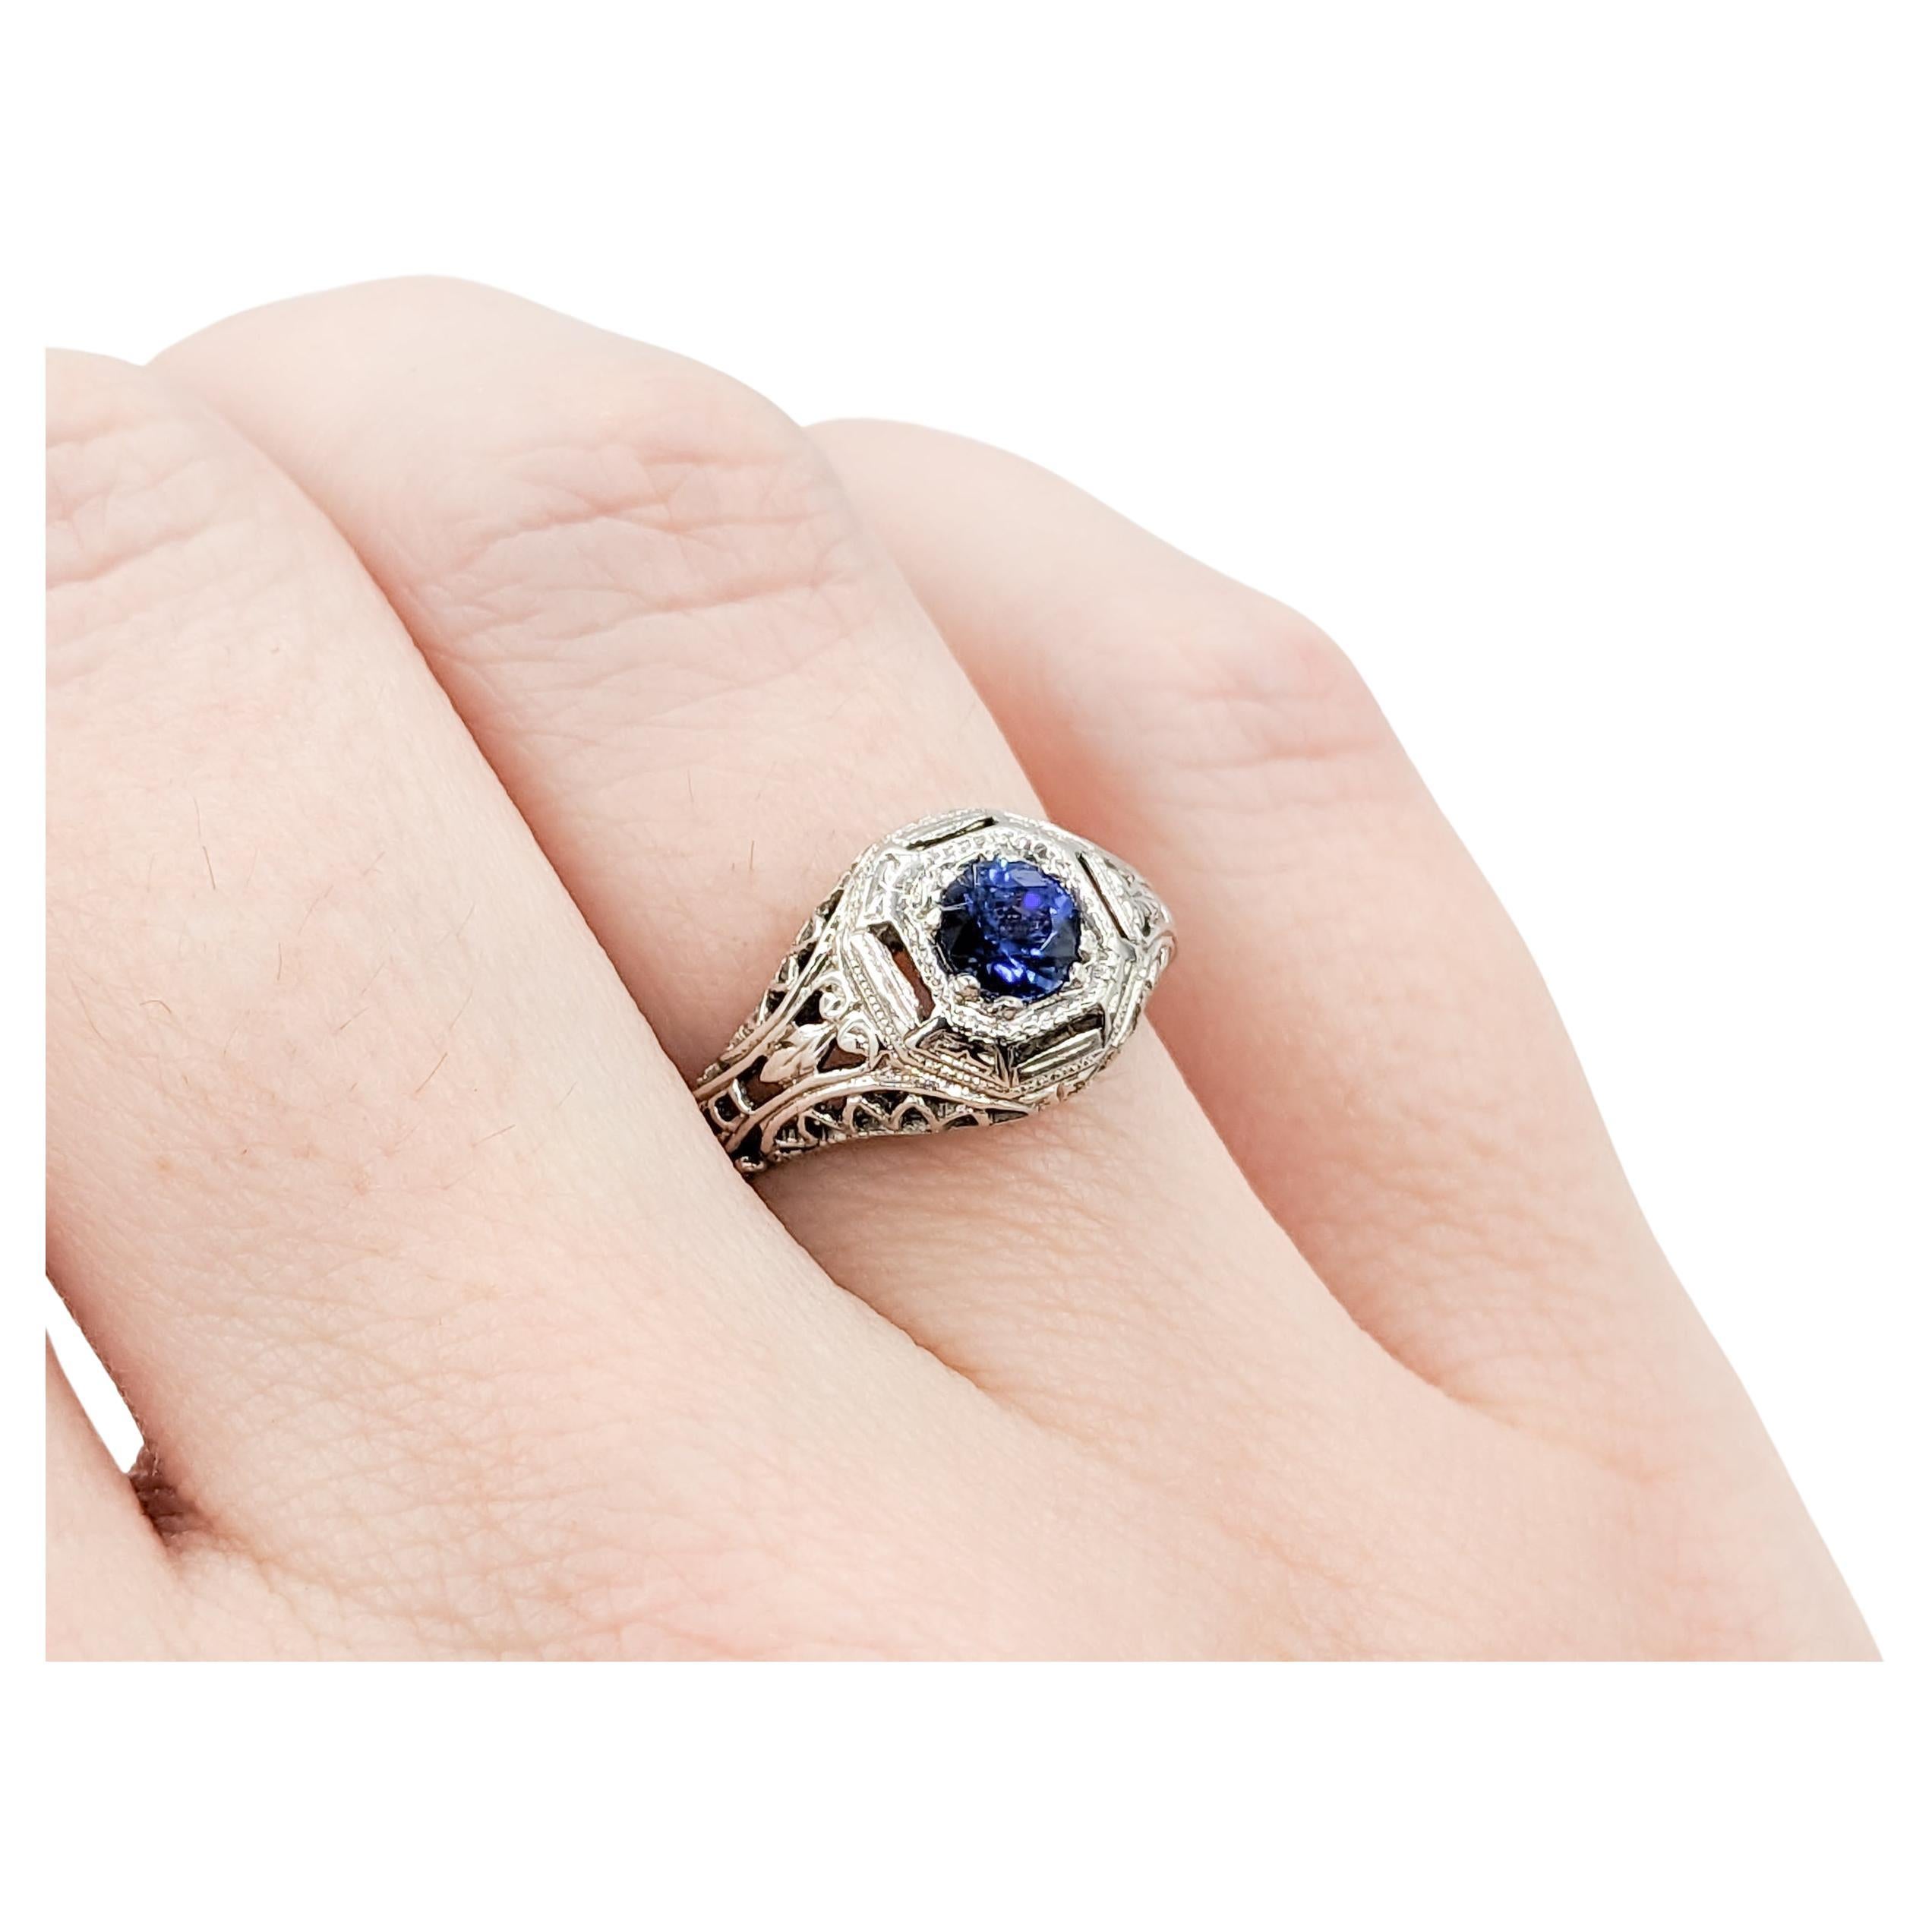 Antique Art Deco Filigree Sapphire Ring 18kt White Gold

Discover the timeless allure of our Art Deco Ring, exquisitely forged in 18kt White Gold. Every curve and detail of its Antique Filigree design transports you to an era of vintage